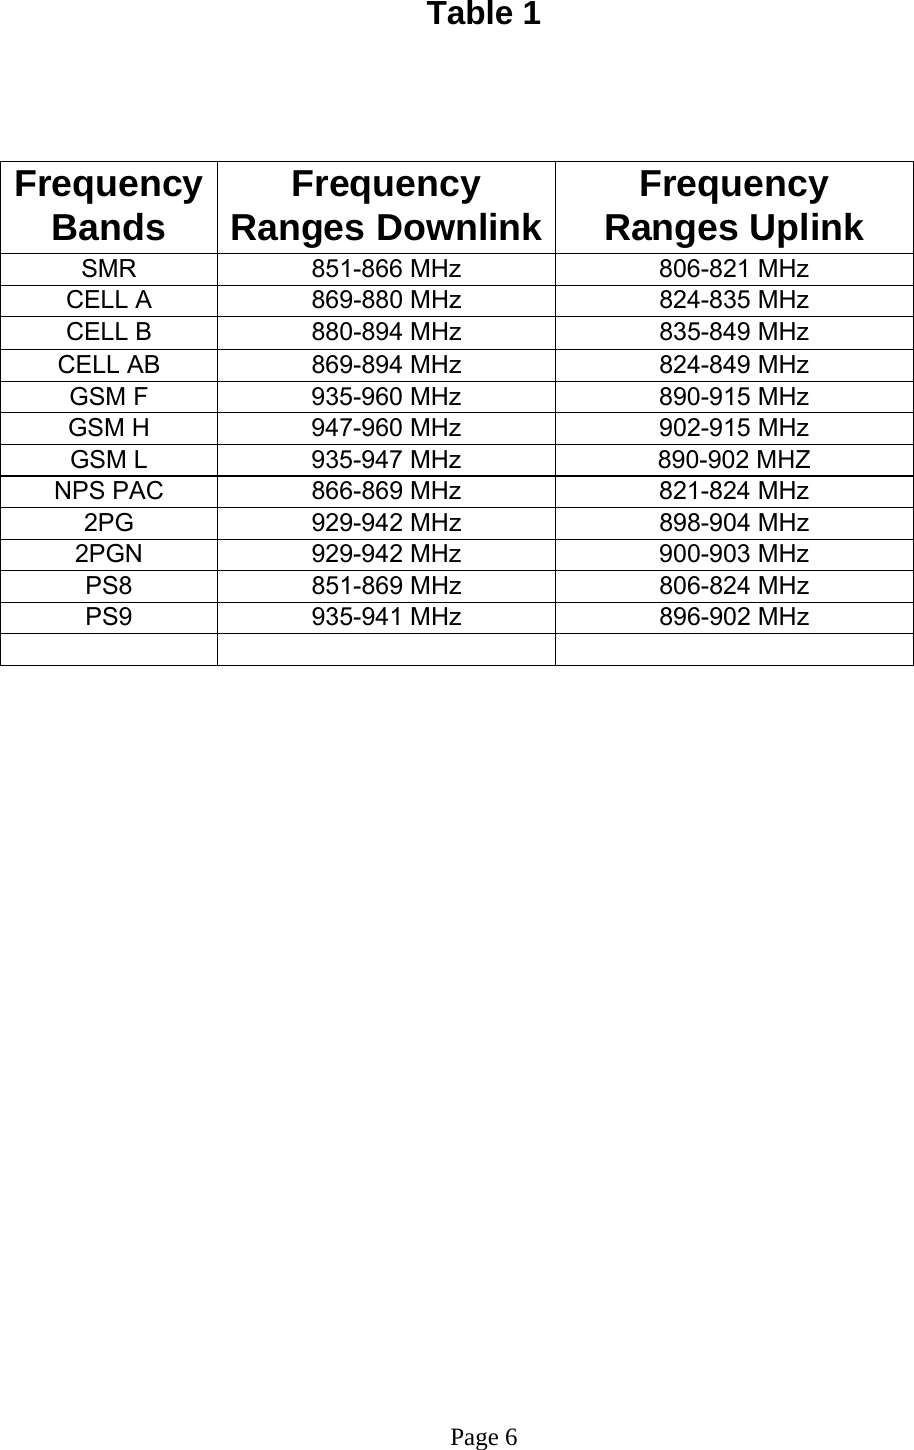  Table 1    Frequency Bands  Frequency Ranges Downlink Frequency Ranges Uplink SMR  851-866 MHz  806-821 MHz CELL A  869-880 MHz  824-835 MHz CELL B  880-894 MHz  835-849 MHz CELL AB  869-894 MHz  824-849 MHz GSM F  935-960 MHz  890-915 MHz GSM H  947-960 MHz  902-915 MHz GSM L  935-947 MHz  890-902 MHZ NPS PAC  866-869 MHz  821-824 MHz 2PG  929-942 MHz  898-904 MHz 2PGN  929-942 MHz  900-903 MHz PS8  851-869 MHz  806-824 MHz PS9  935-941 MHz  896-902 MHz                         Page 6 